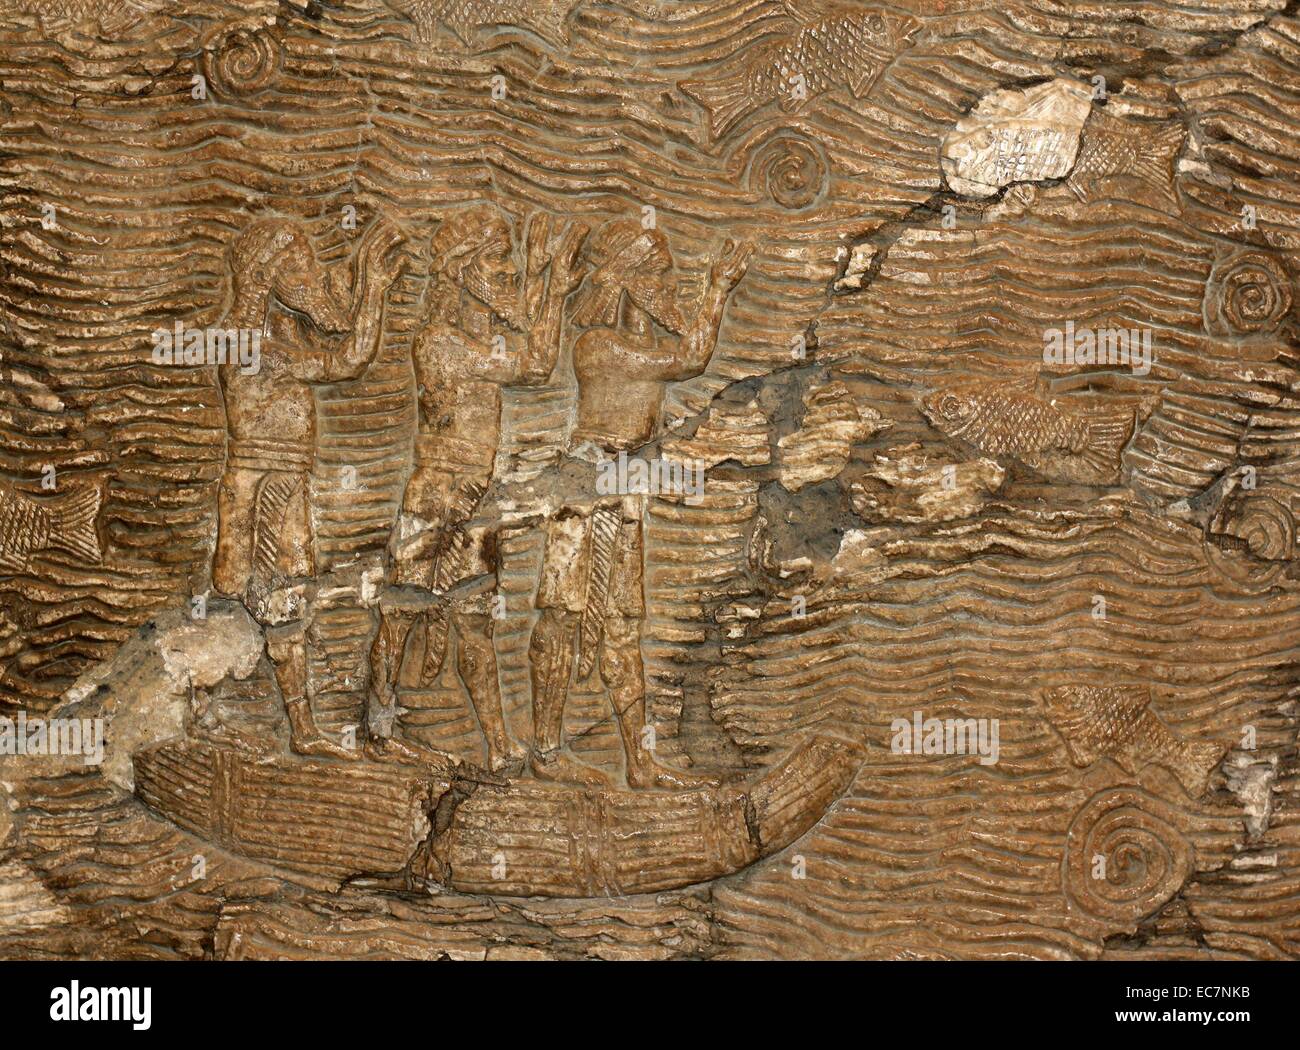 Campaigning in southern Iraq.  Assyrian about 640-620BC.  From Nineveh.  Assyrian soldiers lead prisoners through a landscape of date-palms, with a river beyond.  At the far end heads are counted and the booty piled in front of two clerks  recording the details in a book and on a scroll. Stock Photo